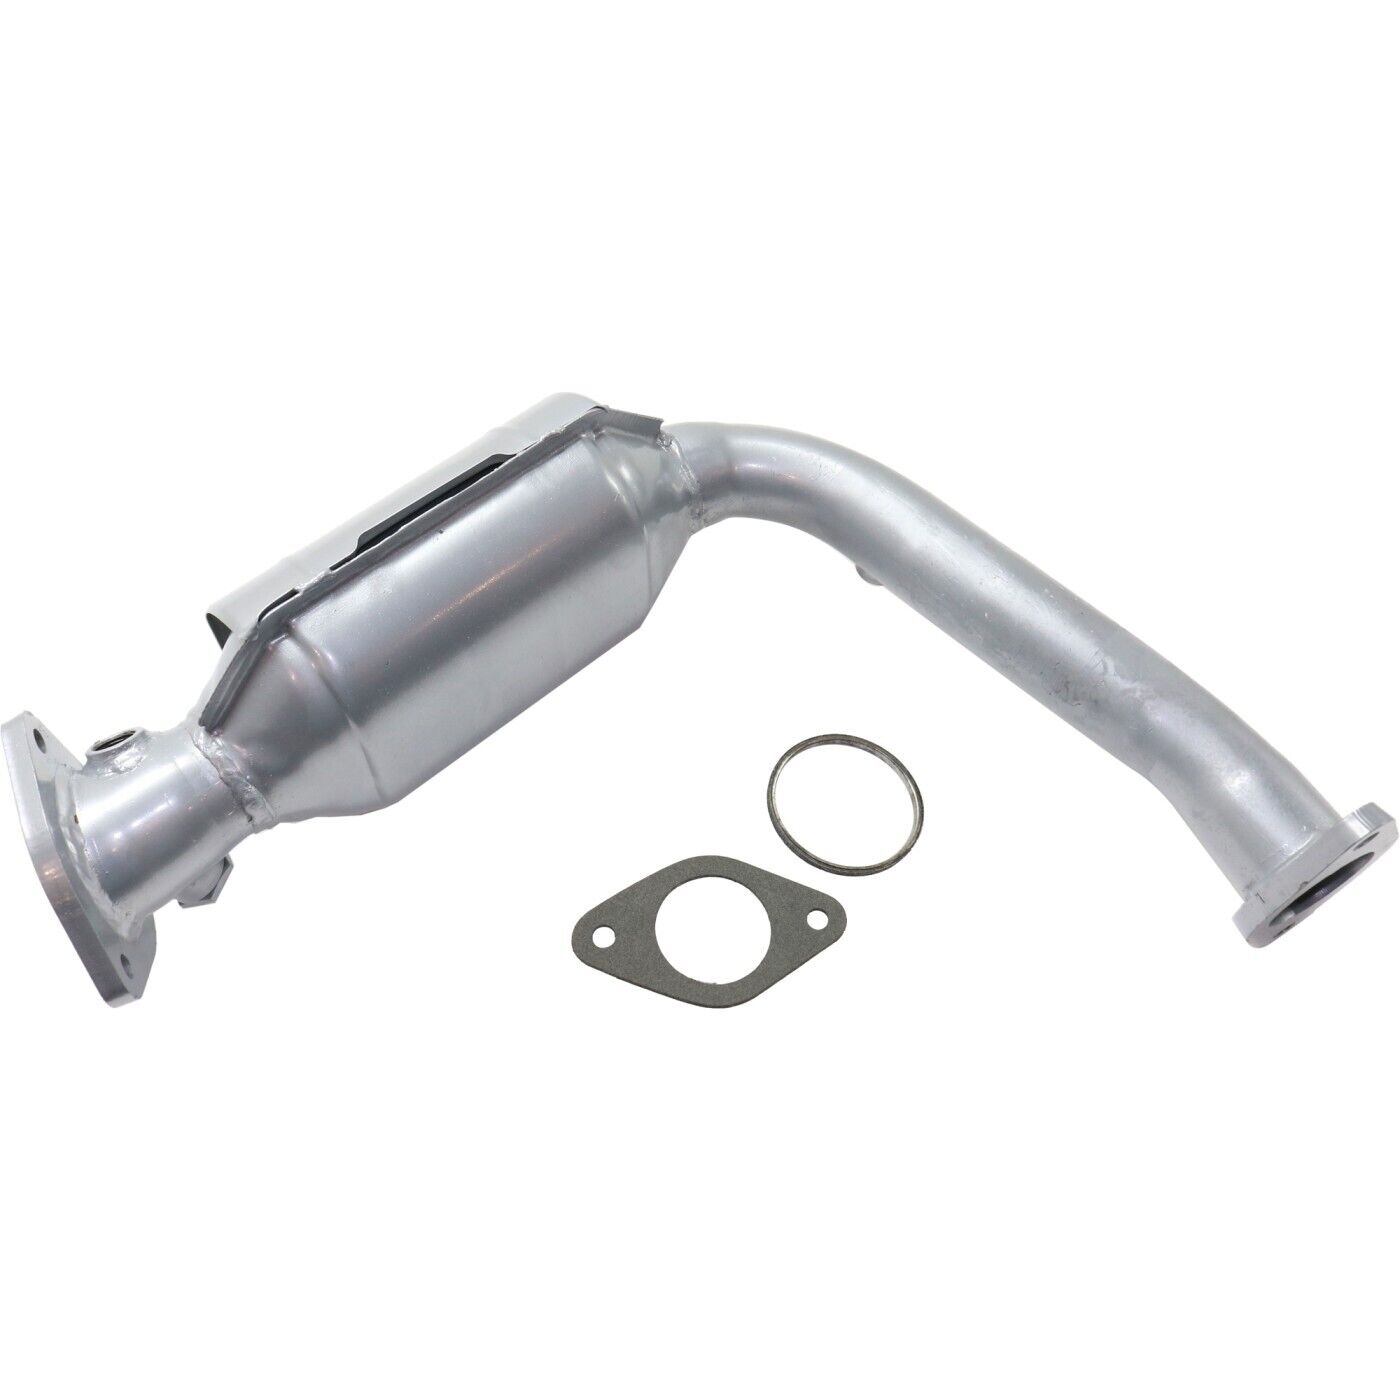 Front Catalytic Converter For 2000-2004 Ford Focus Aluminized Steel With Gasket